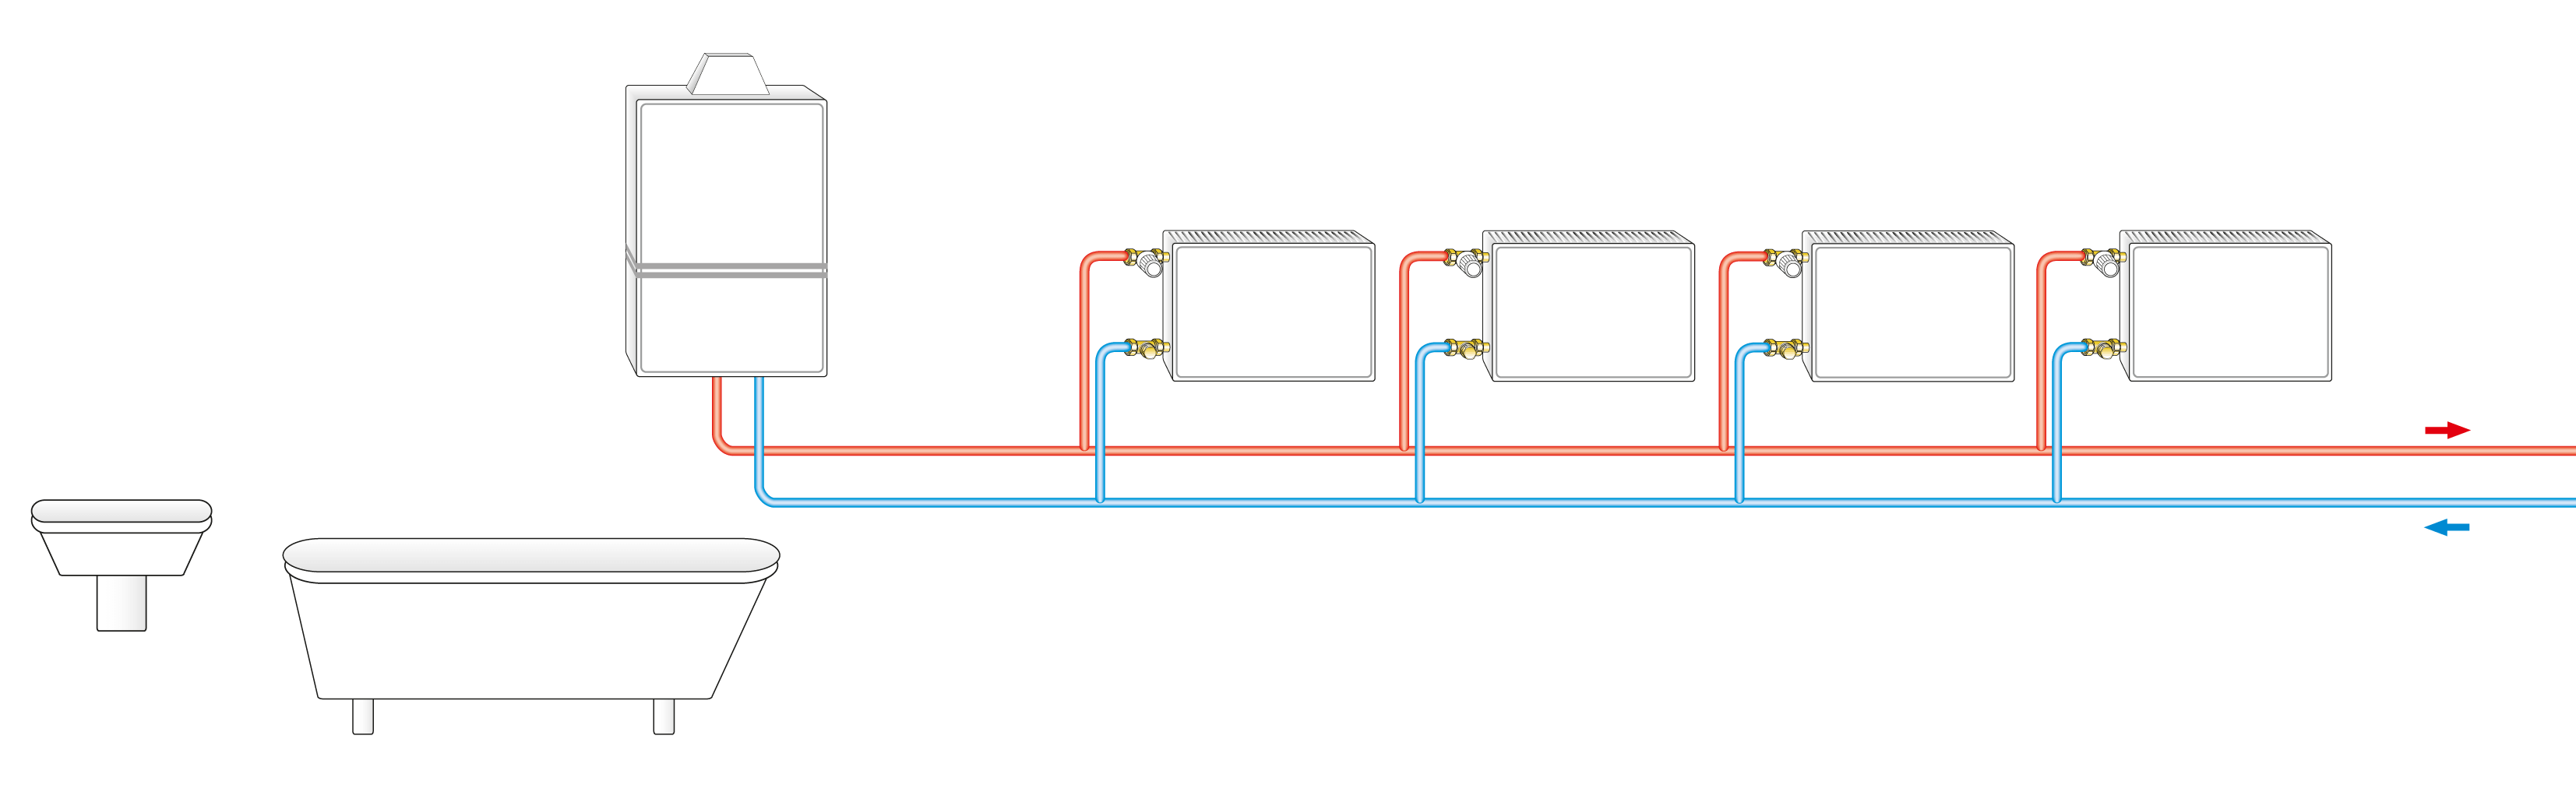 Radiator system - apartments with individual heat source